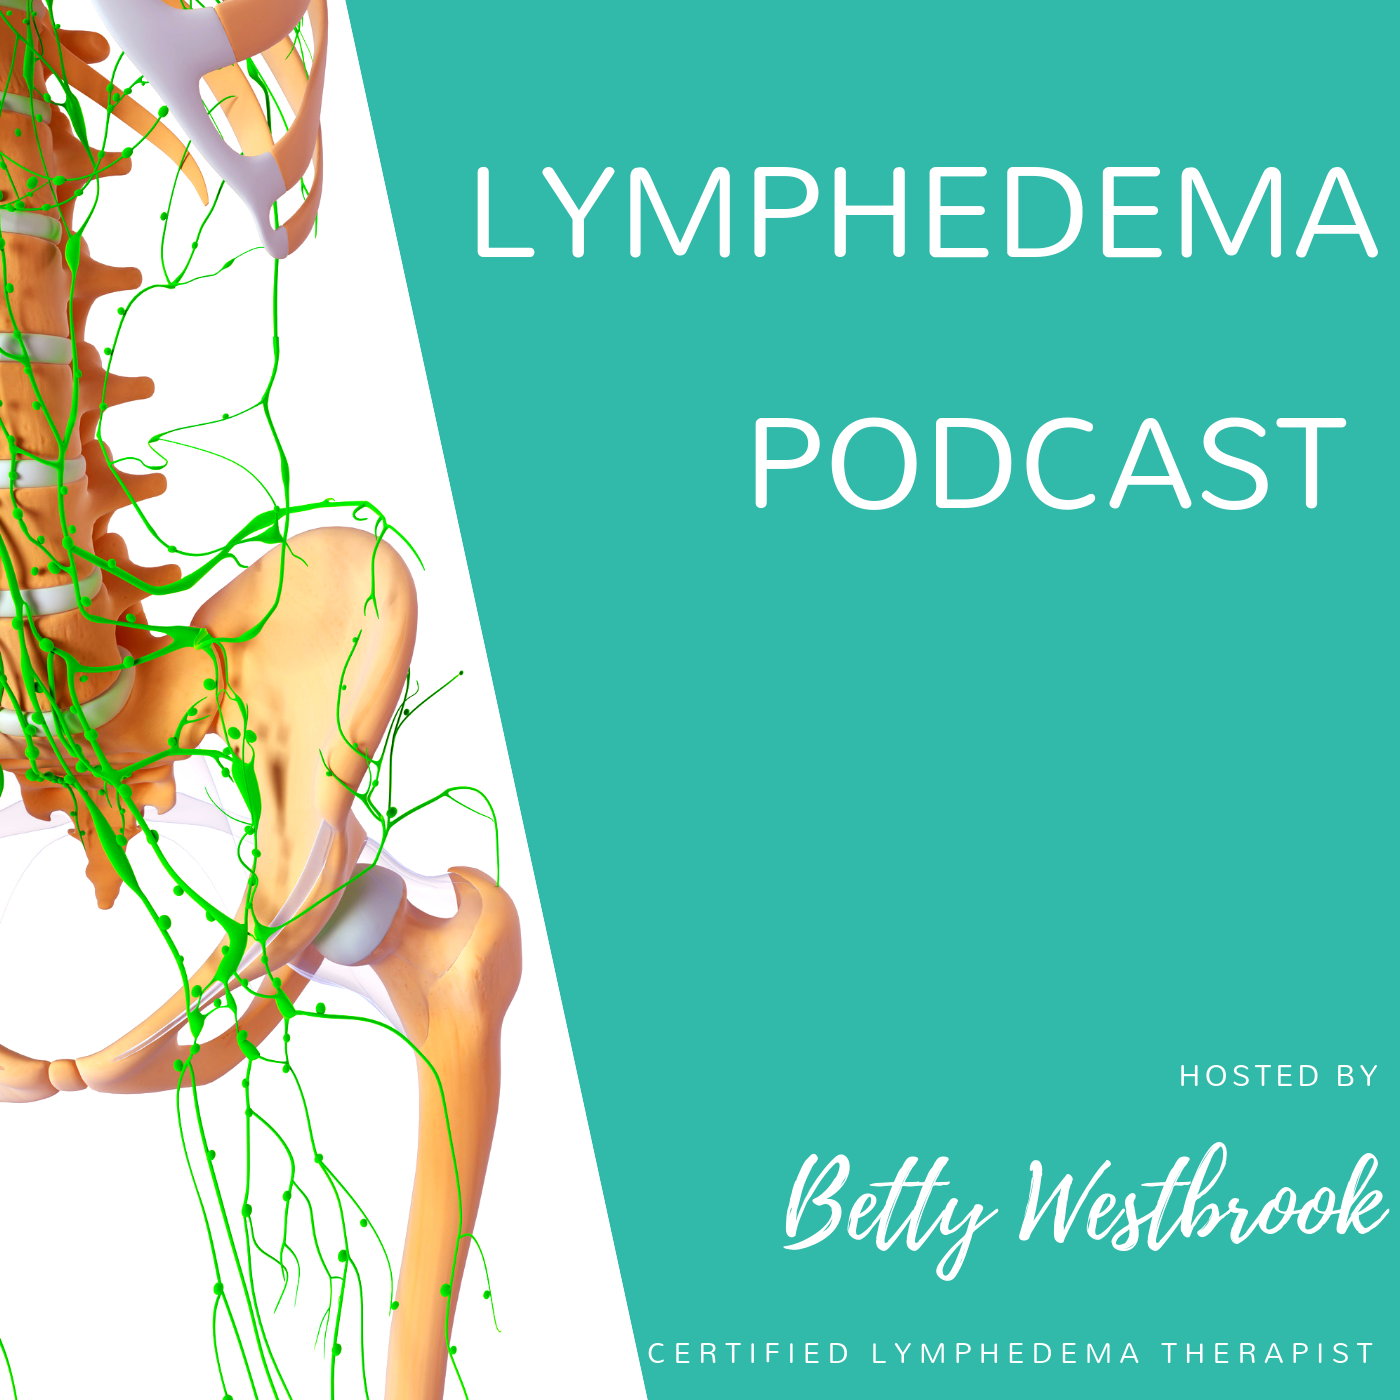 A highlight from Episode 86: Guest host Jean LAMantia, author of The Complete Lymphedema Management and Nutrition Guide.